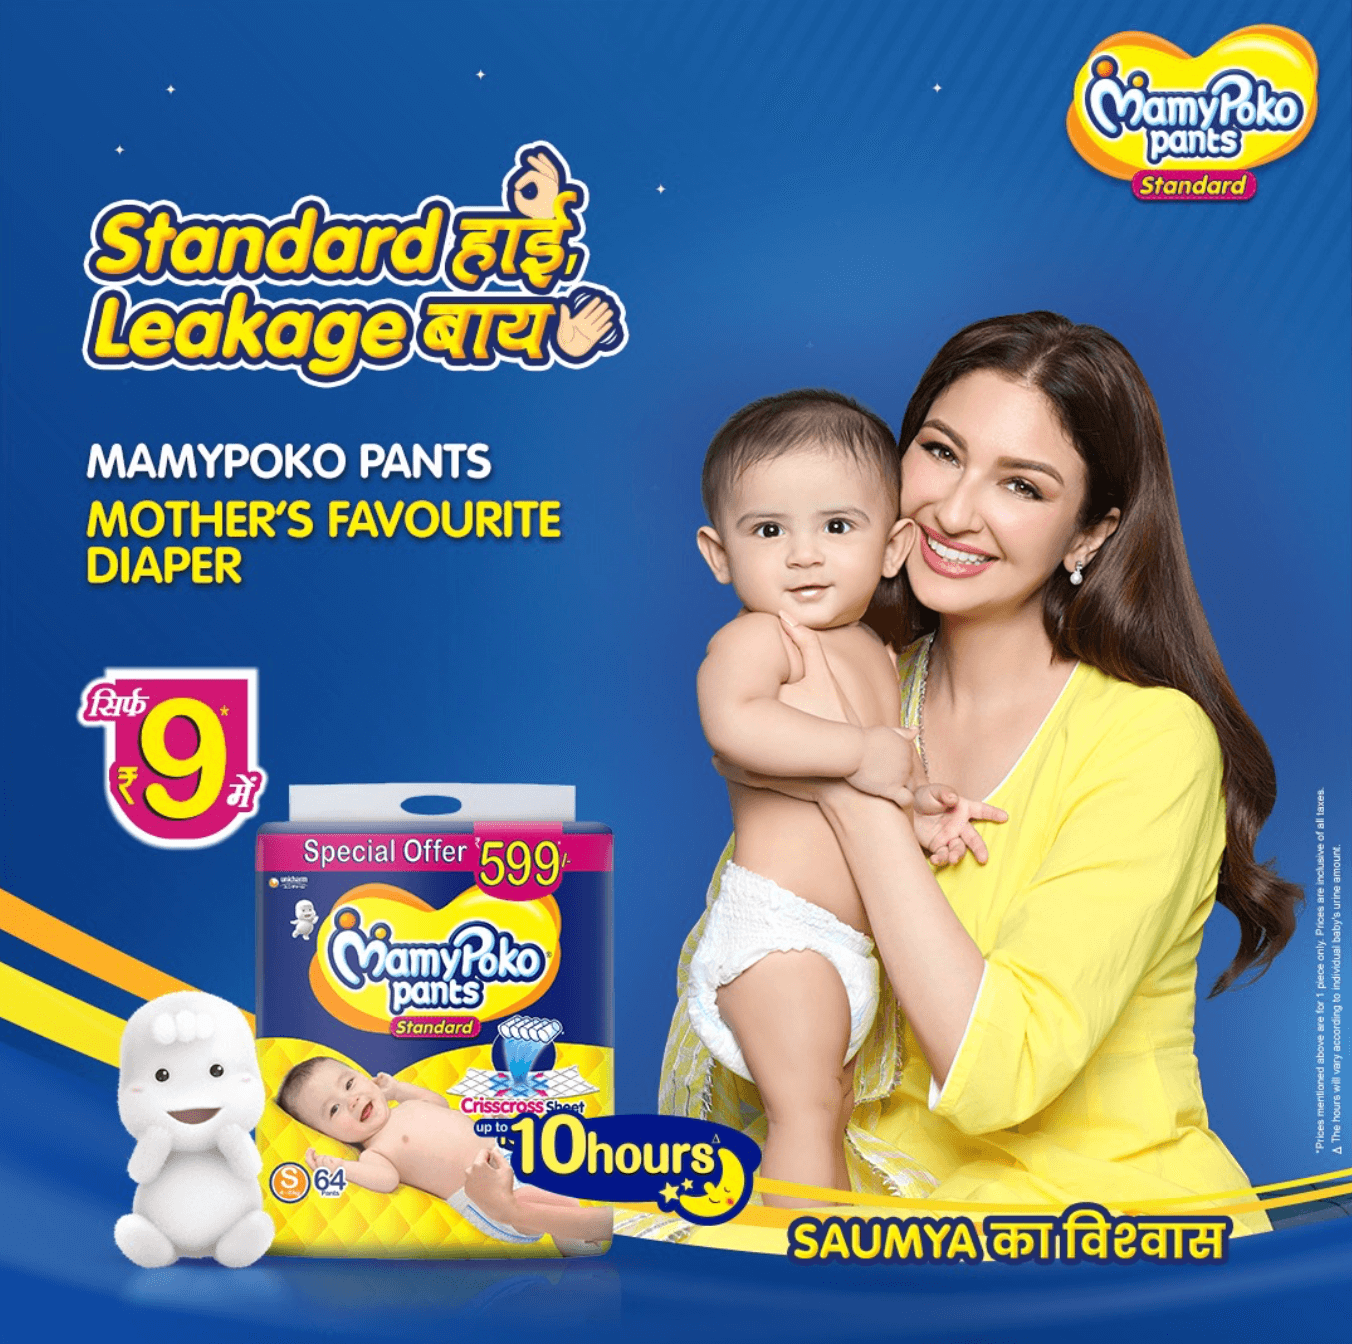 Keep your baby happy and cozy right from the start with MamyPoko Tape New  Baby. #BabyNeeds #BabyDiapers #DiaperPants #TapeStyle… | Instagram